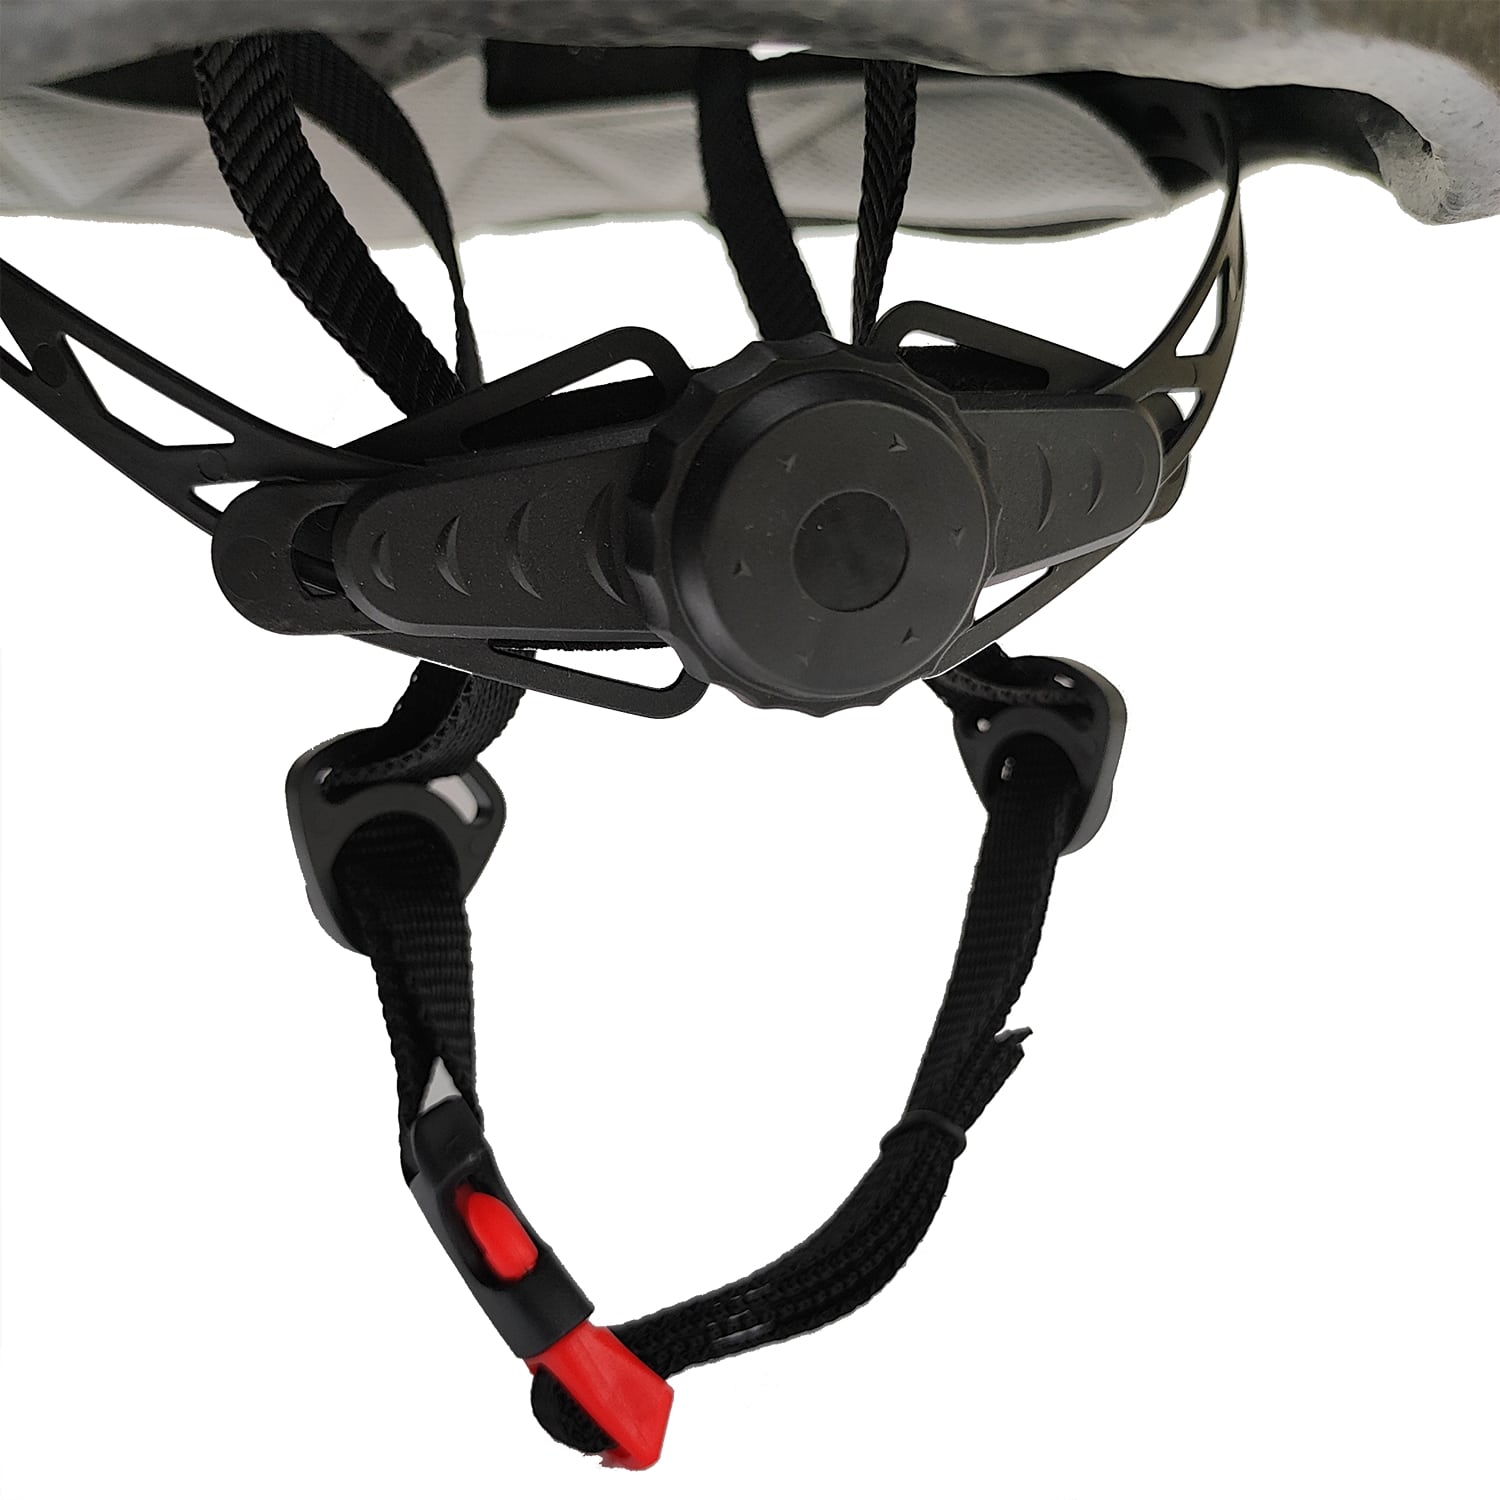 Shop Online Bicycle Helmet Safety Gear by omo bikes for hybrid or mtb cycle adjustable view